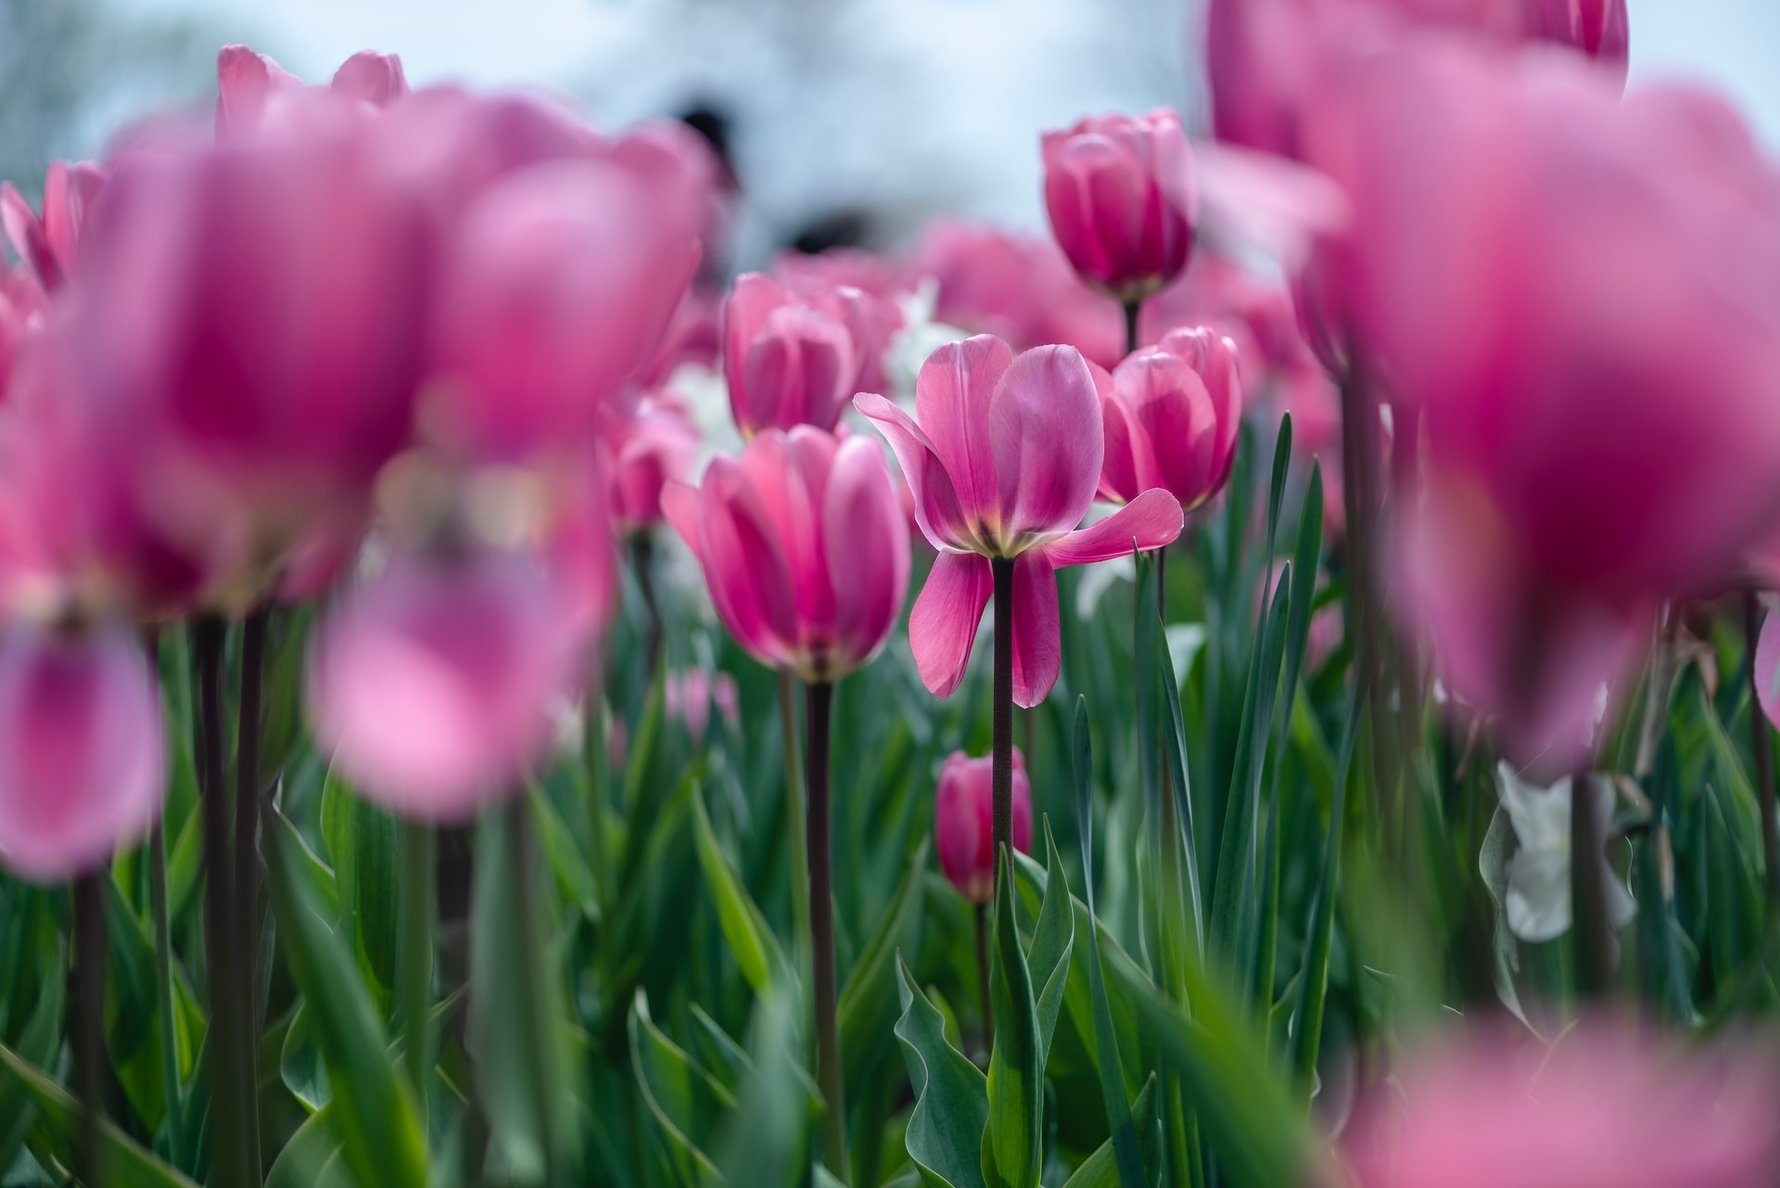 Places in the World for Stunning Flowers - Canadian Tulip Festival © Meng Ji / Unsplash